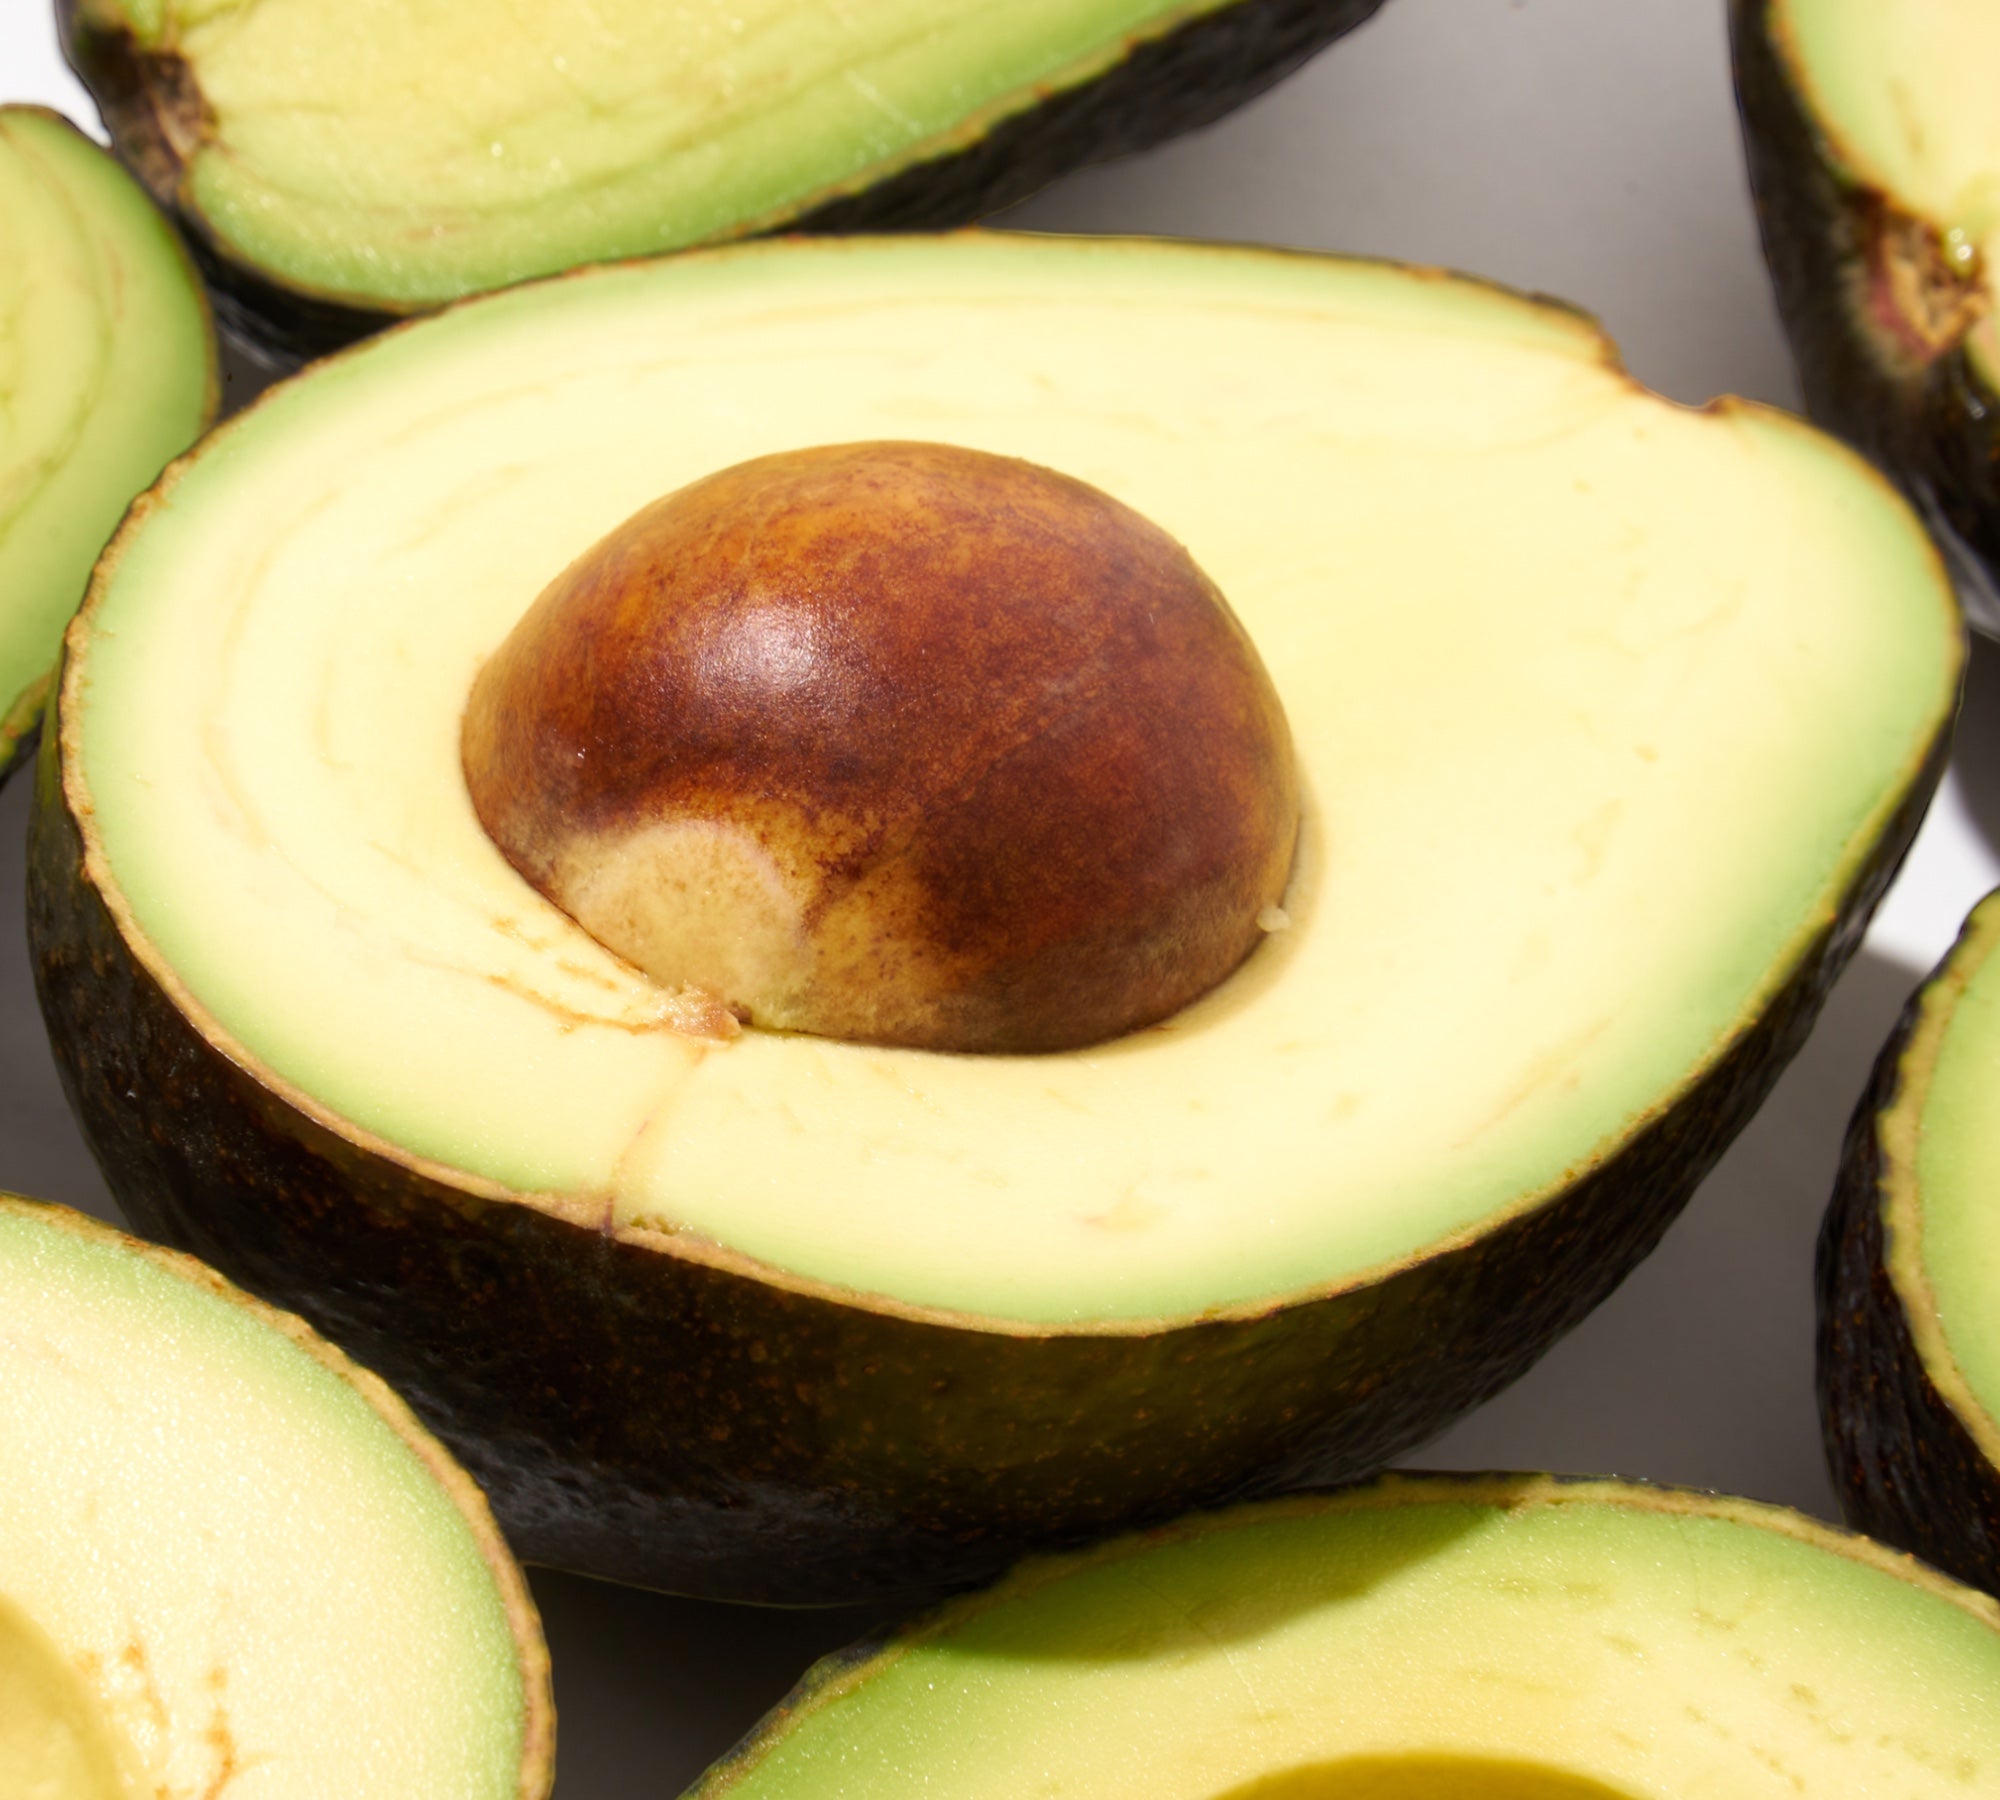 Avocados cut open in halves. They are a Fiber superfood and contains both soluble and insoluble dietary Fibers.